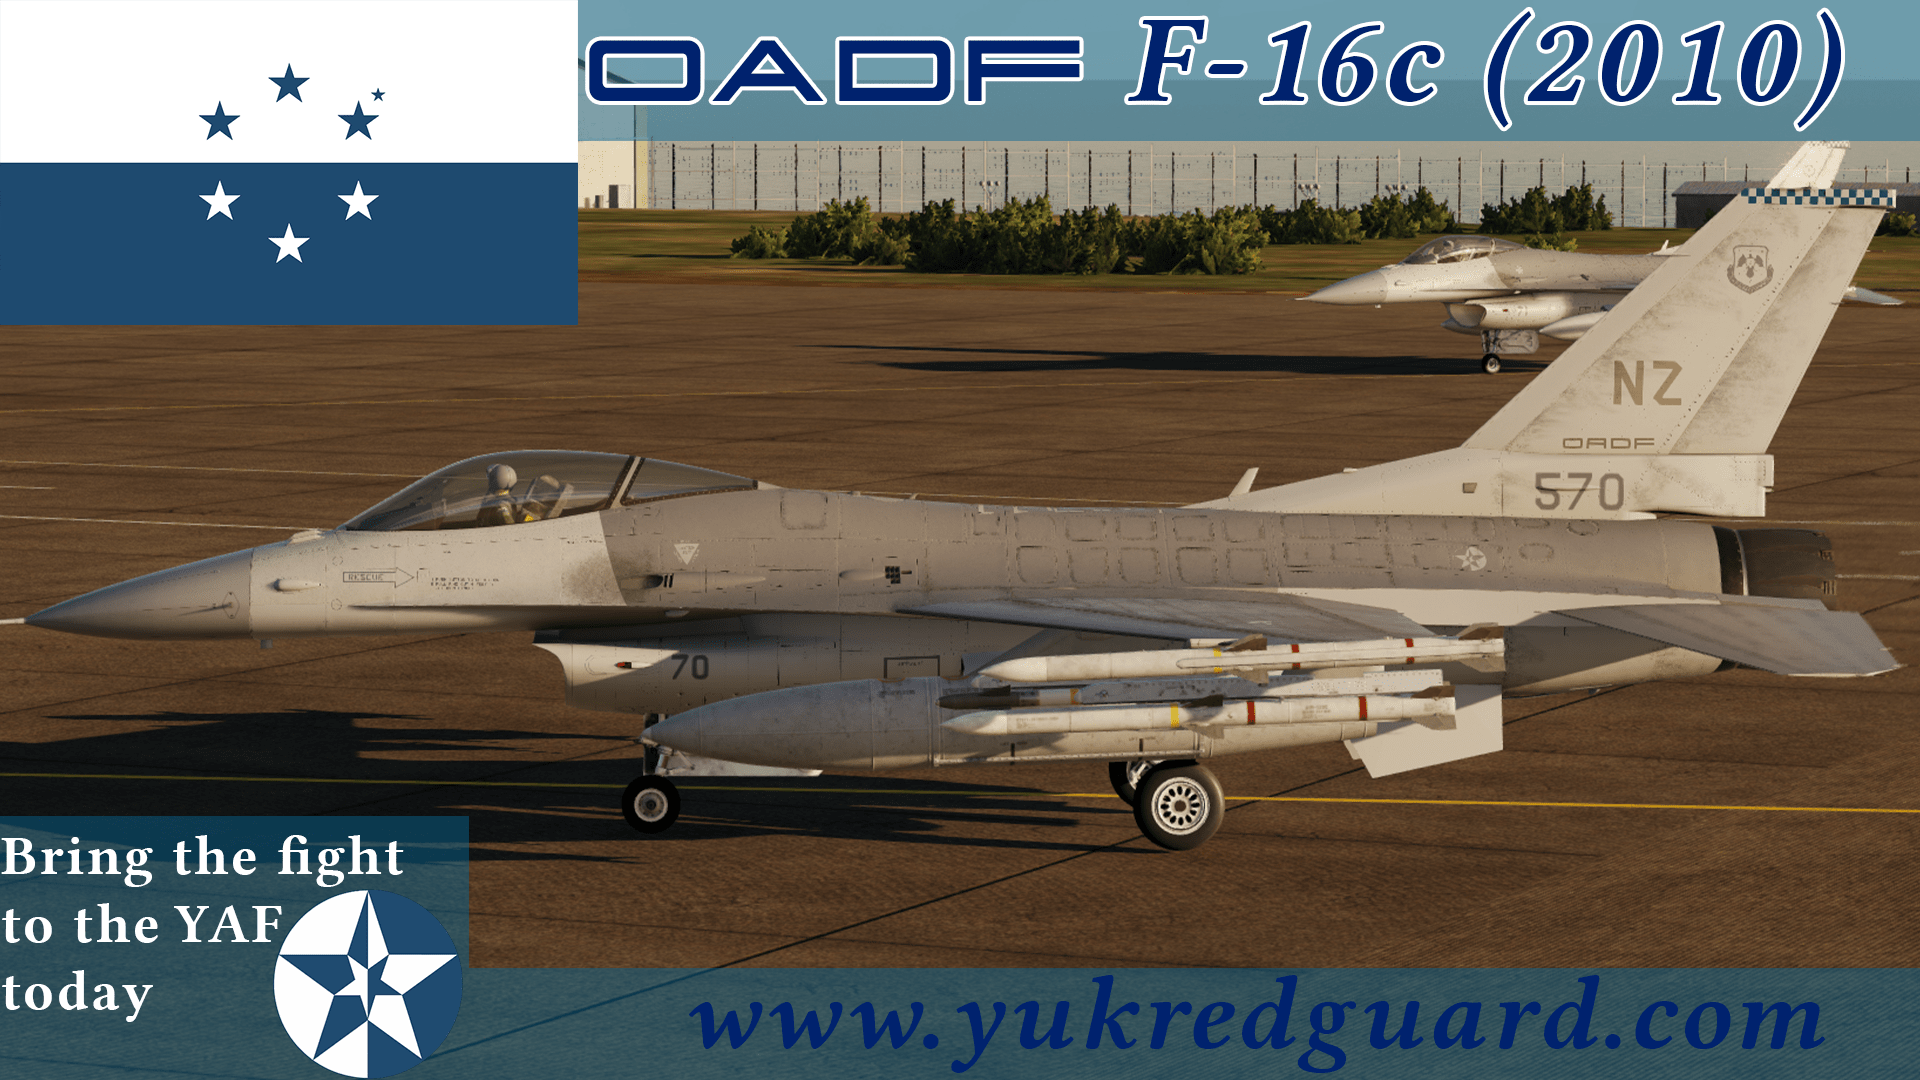 Osean Air Defense Force F-16C (2010) - Ace Combat - Yuktobanian Red Guard (UPDATED)